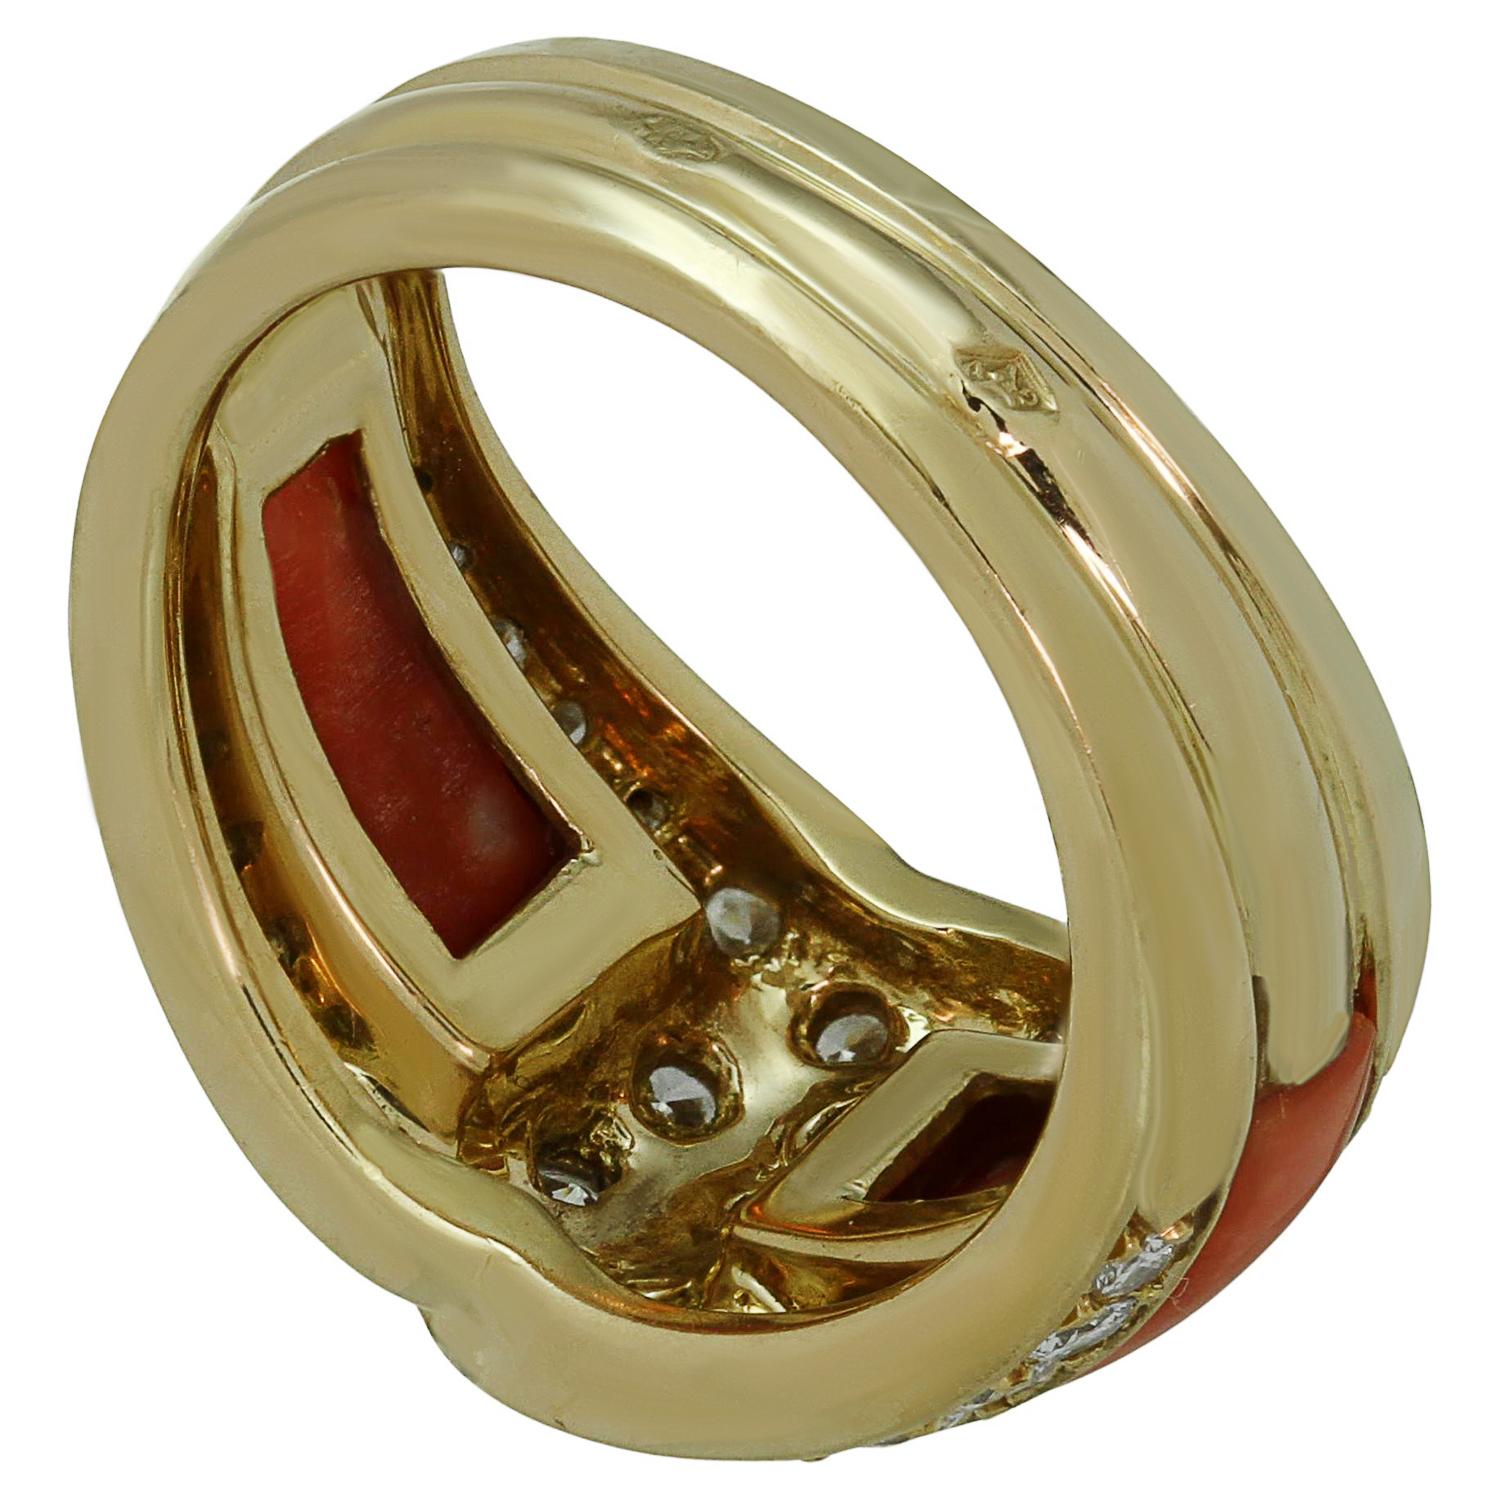 This stunning Van Cleef & Arpels ring is crafted in 18k yellow gold and set with coral surrounded with sparkling brilliant-cut round diamonds of an estimated 0.87 carats. The genuine coral has an orange color with natural white spots. Made in France